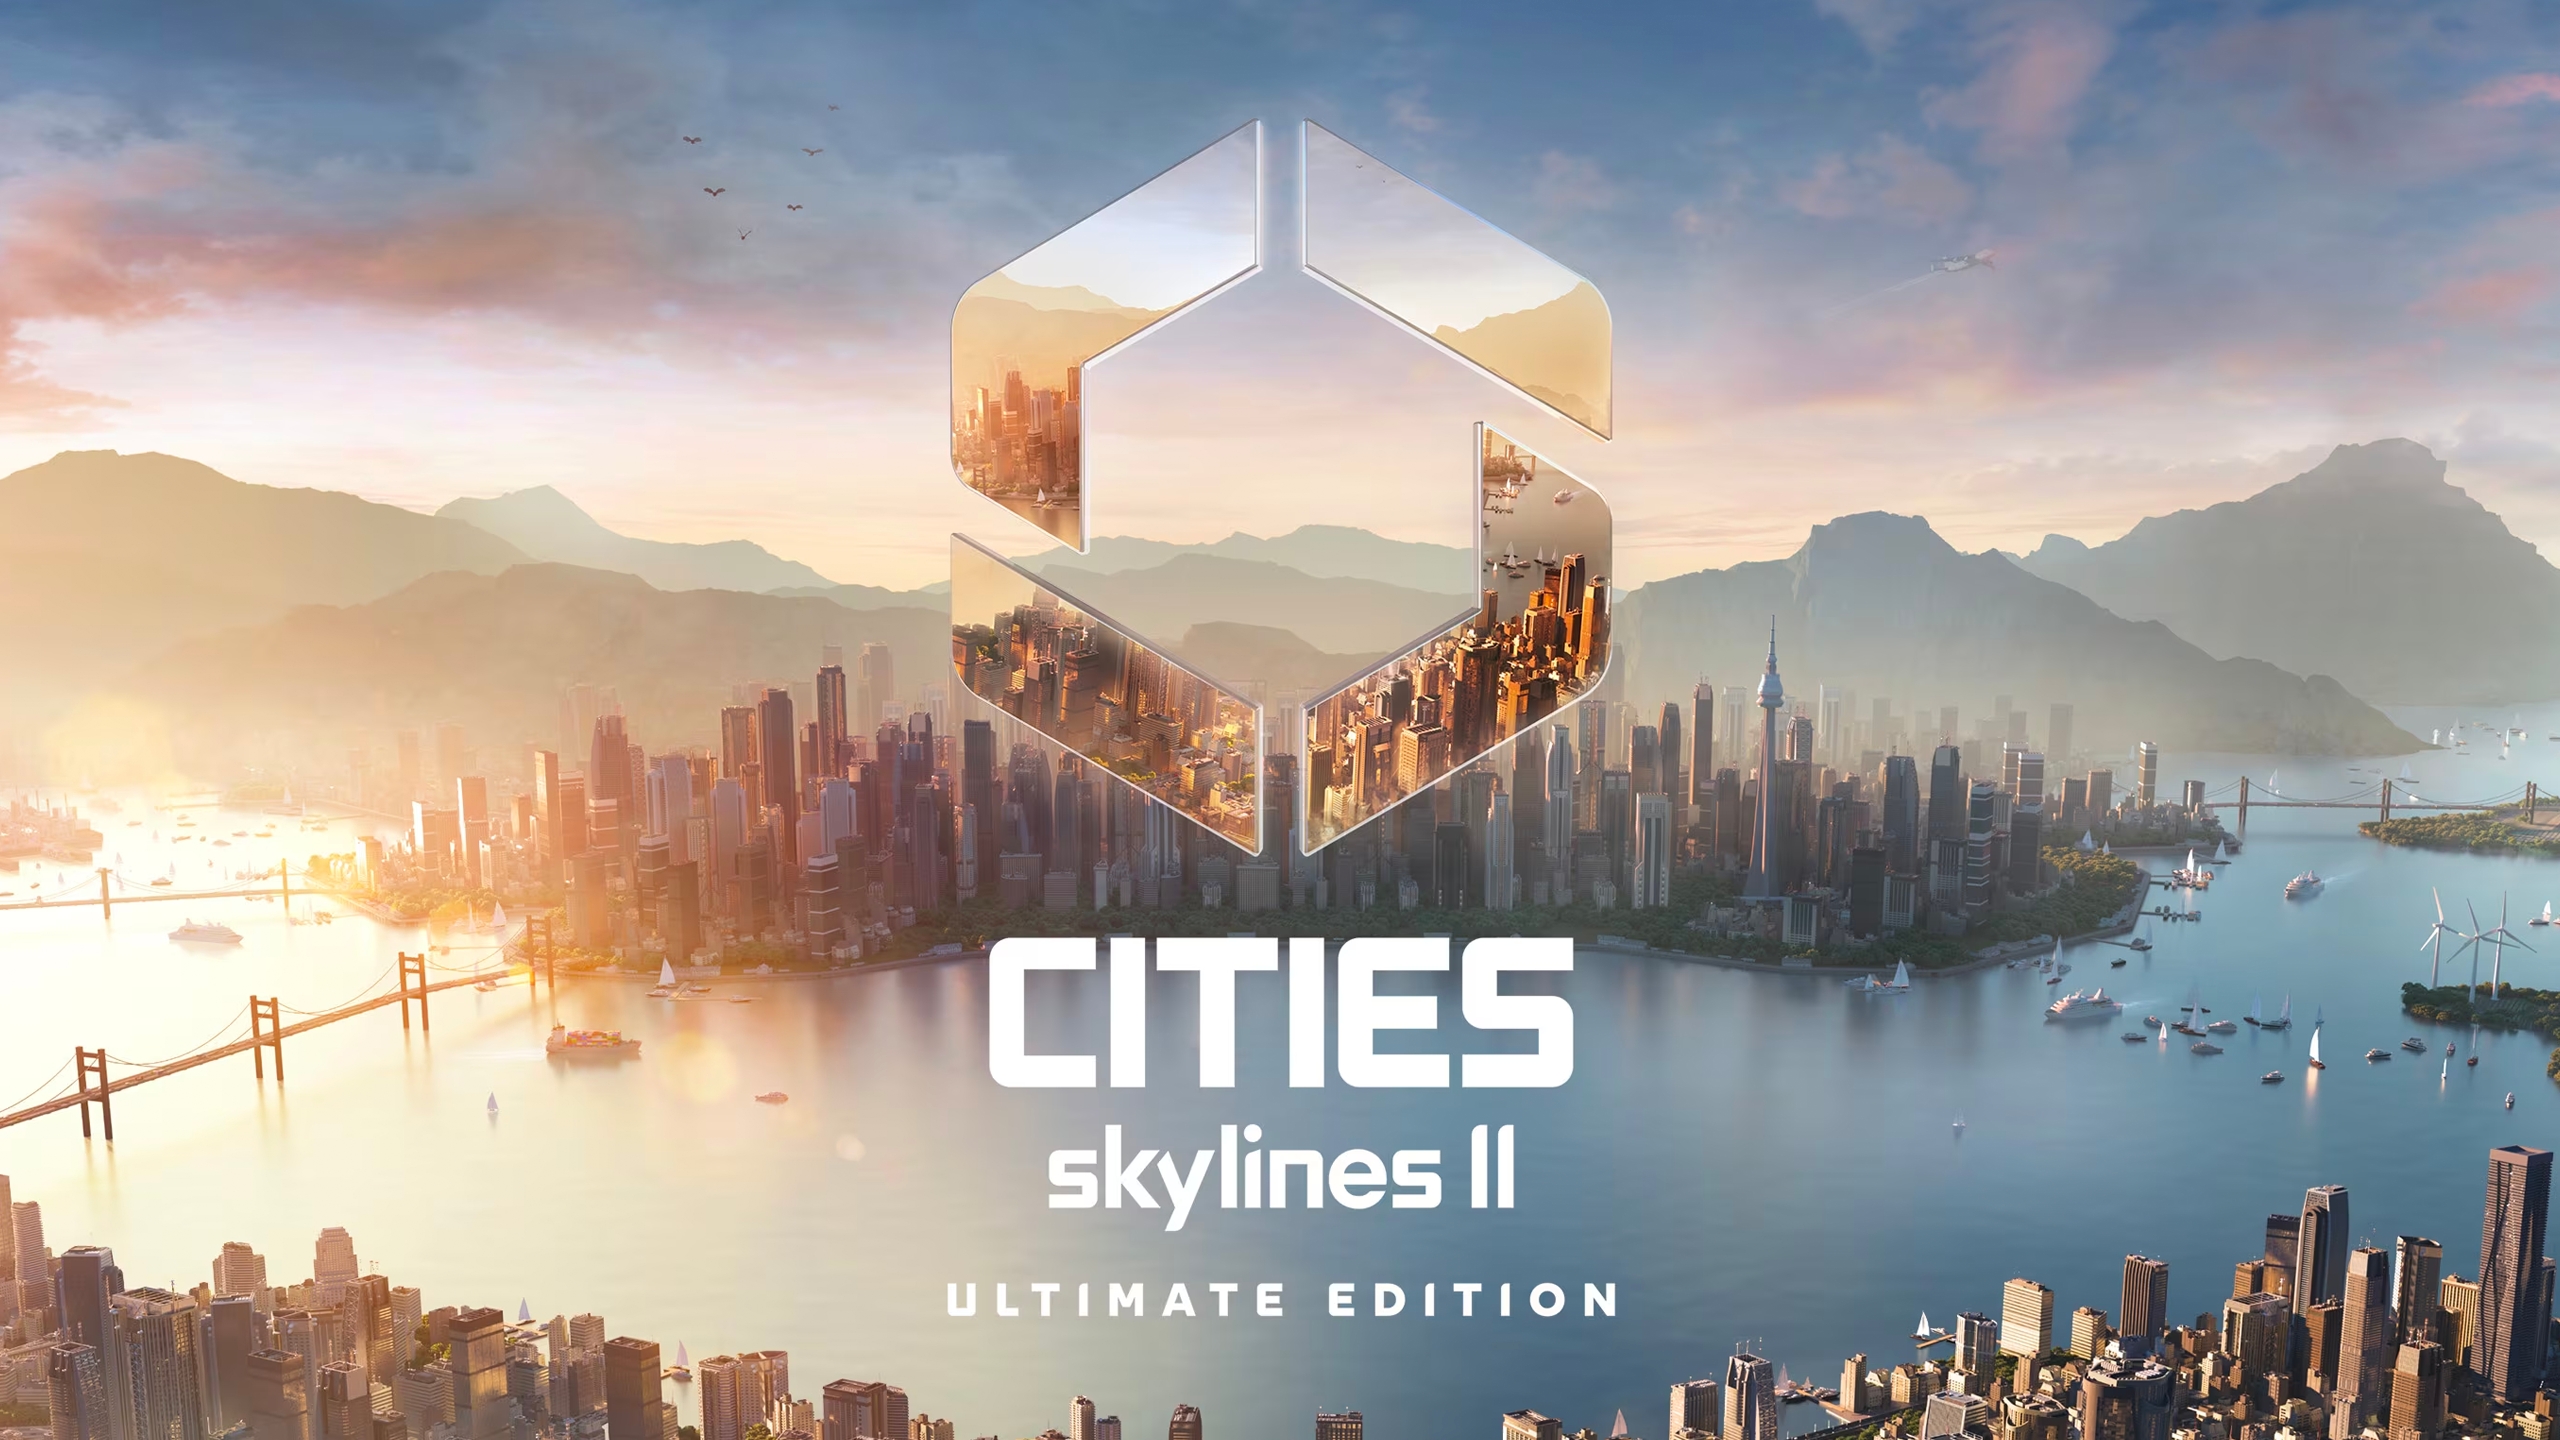 Should You Purchase the Ultimate Edition of Cities: Skylines 2? - Answered